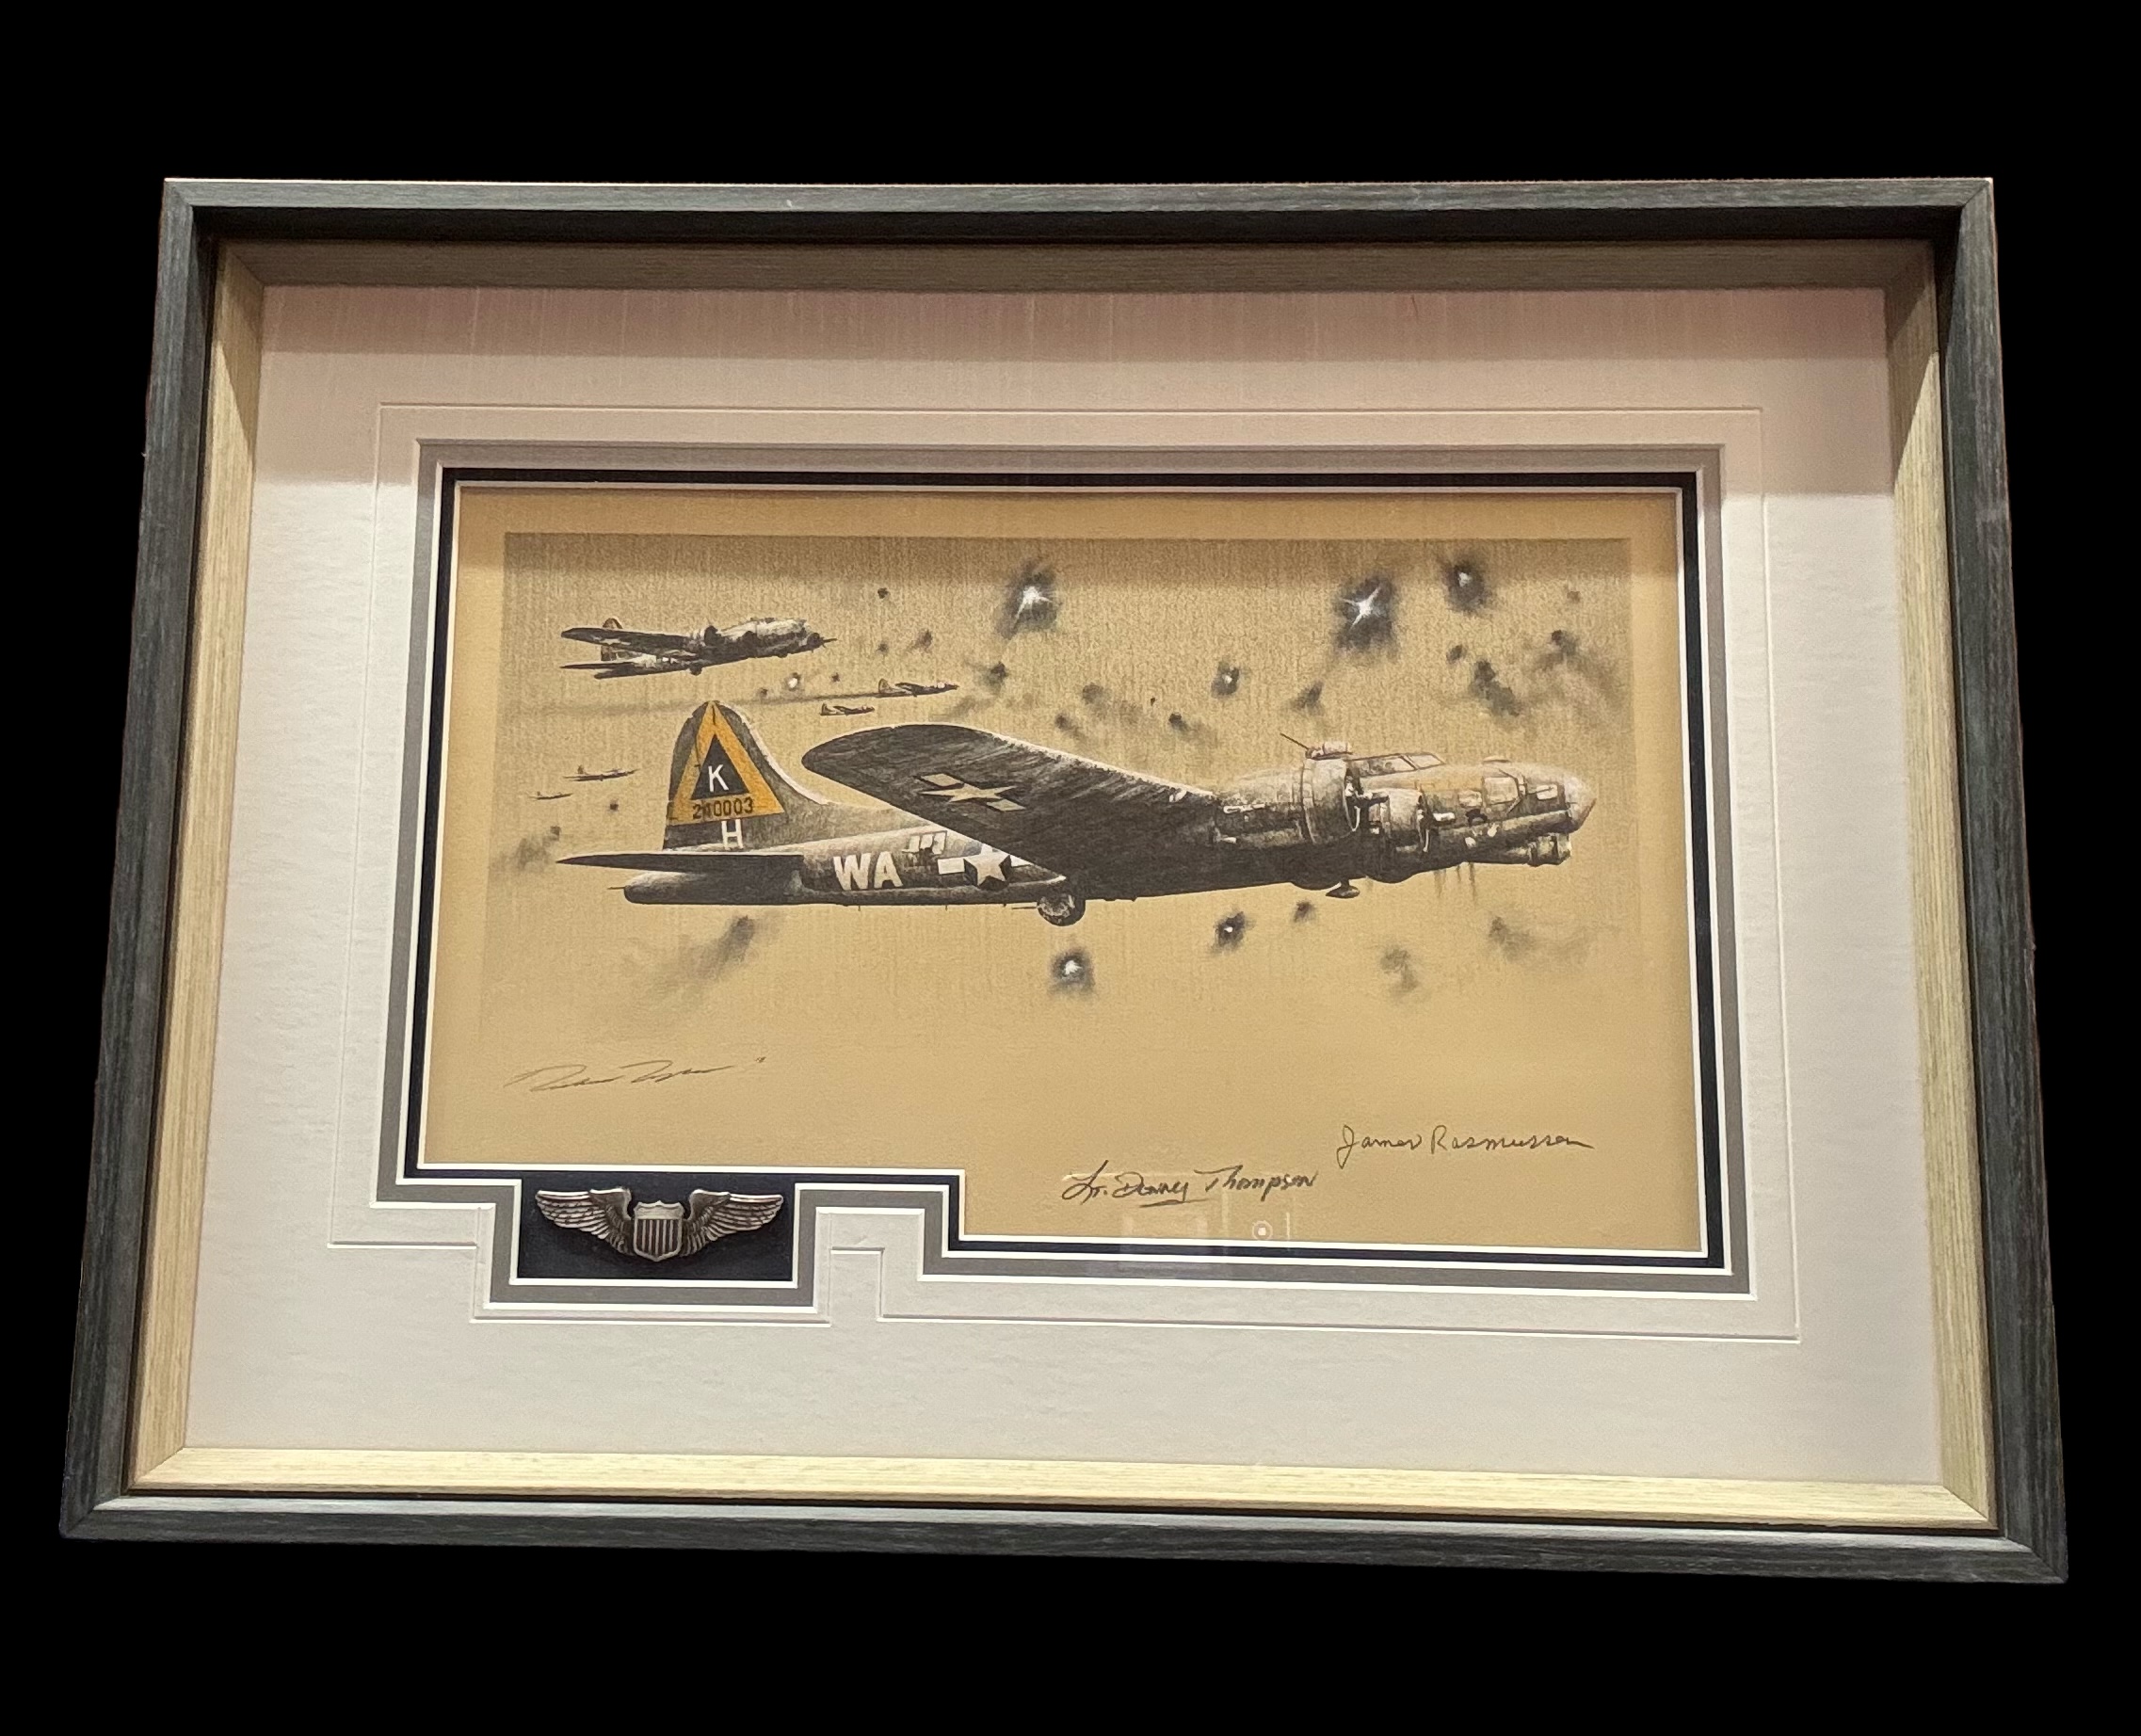 USAF WWII Bomber 23x17 inch framed and mounted print signed in pencil by the artist Robert Taylor - Image 3 of 3